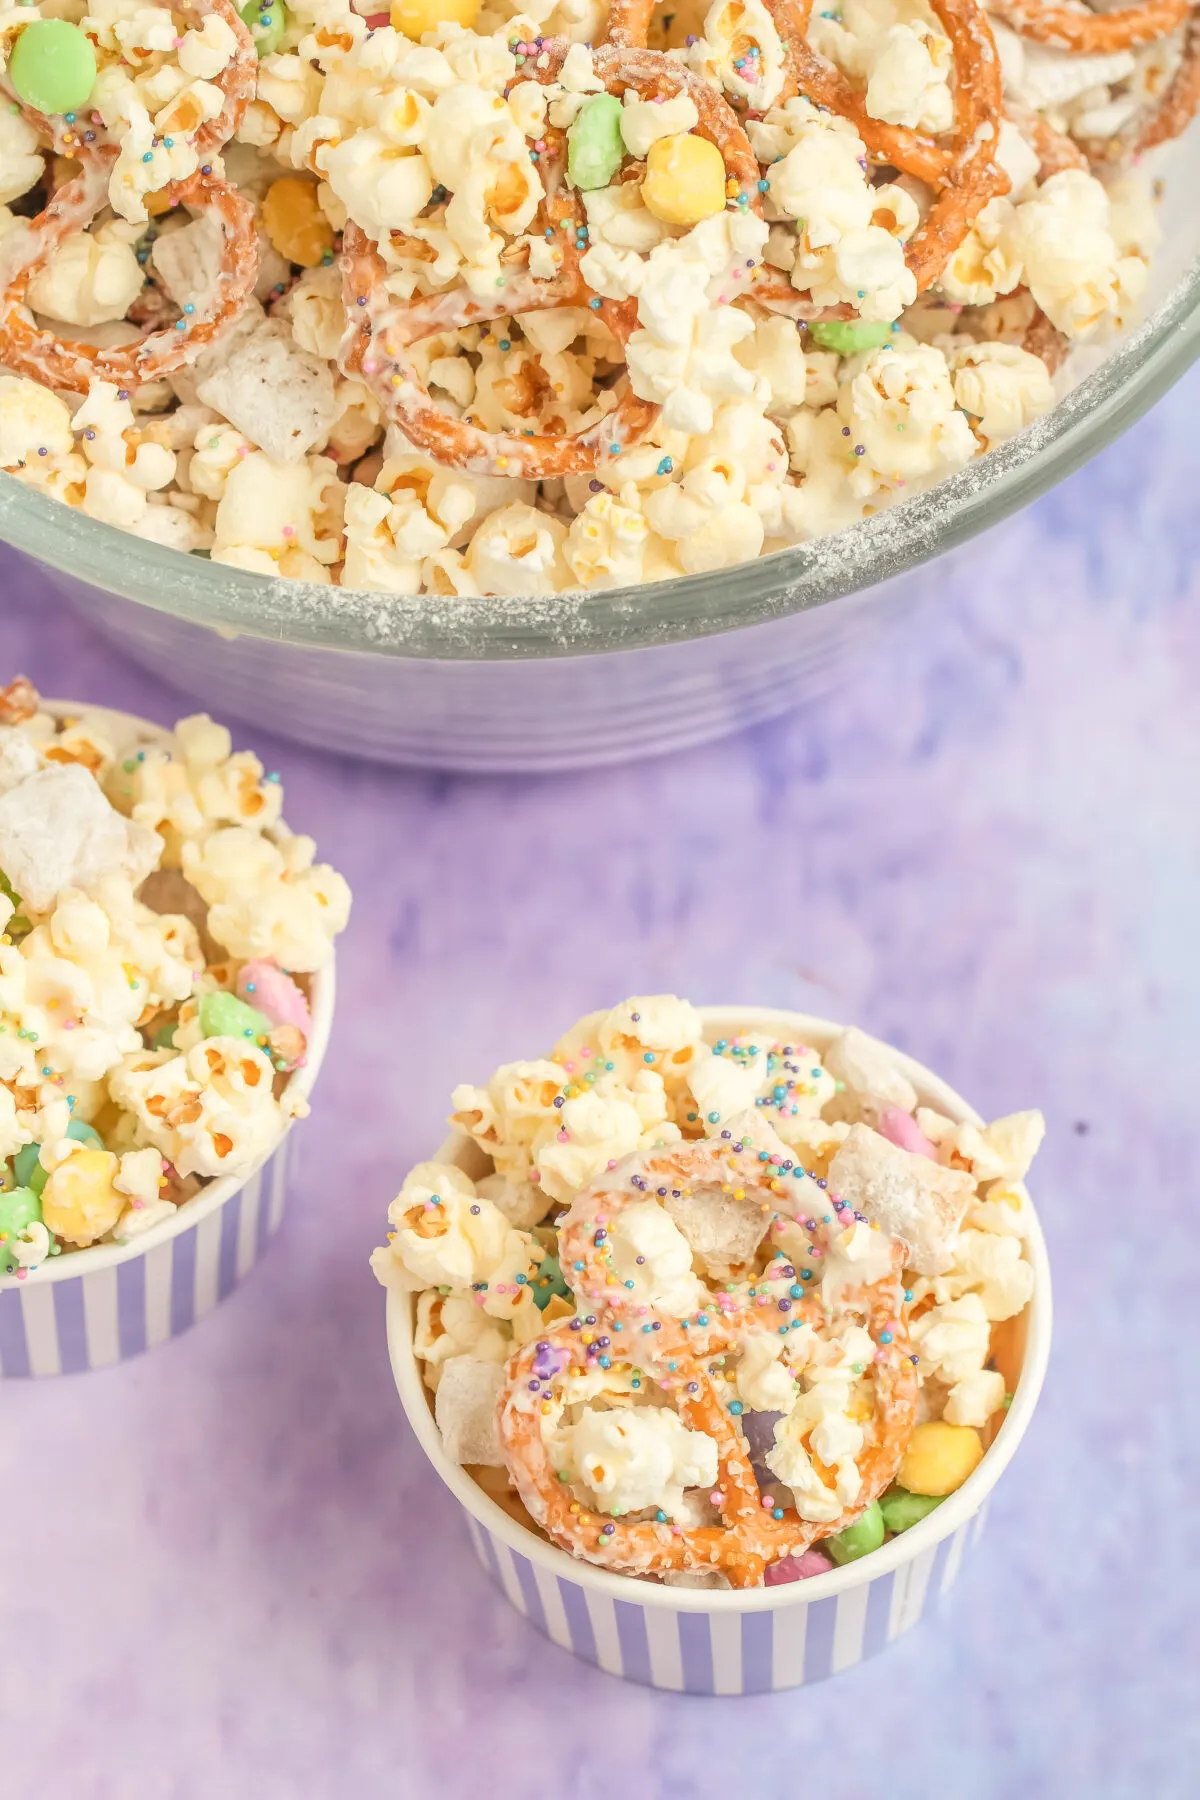 Try this Bunny Bait Recipe featuring popcorn, muddy buddies, pretzels, and candy coated in white chocolate covered in sprinkles this Easter!